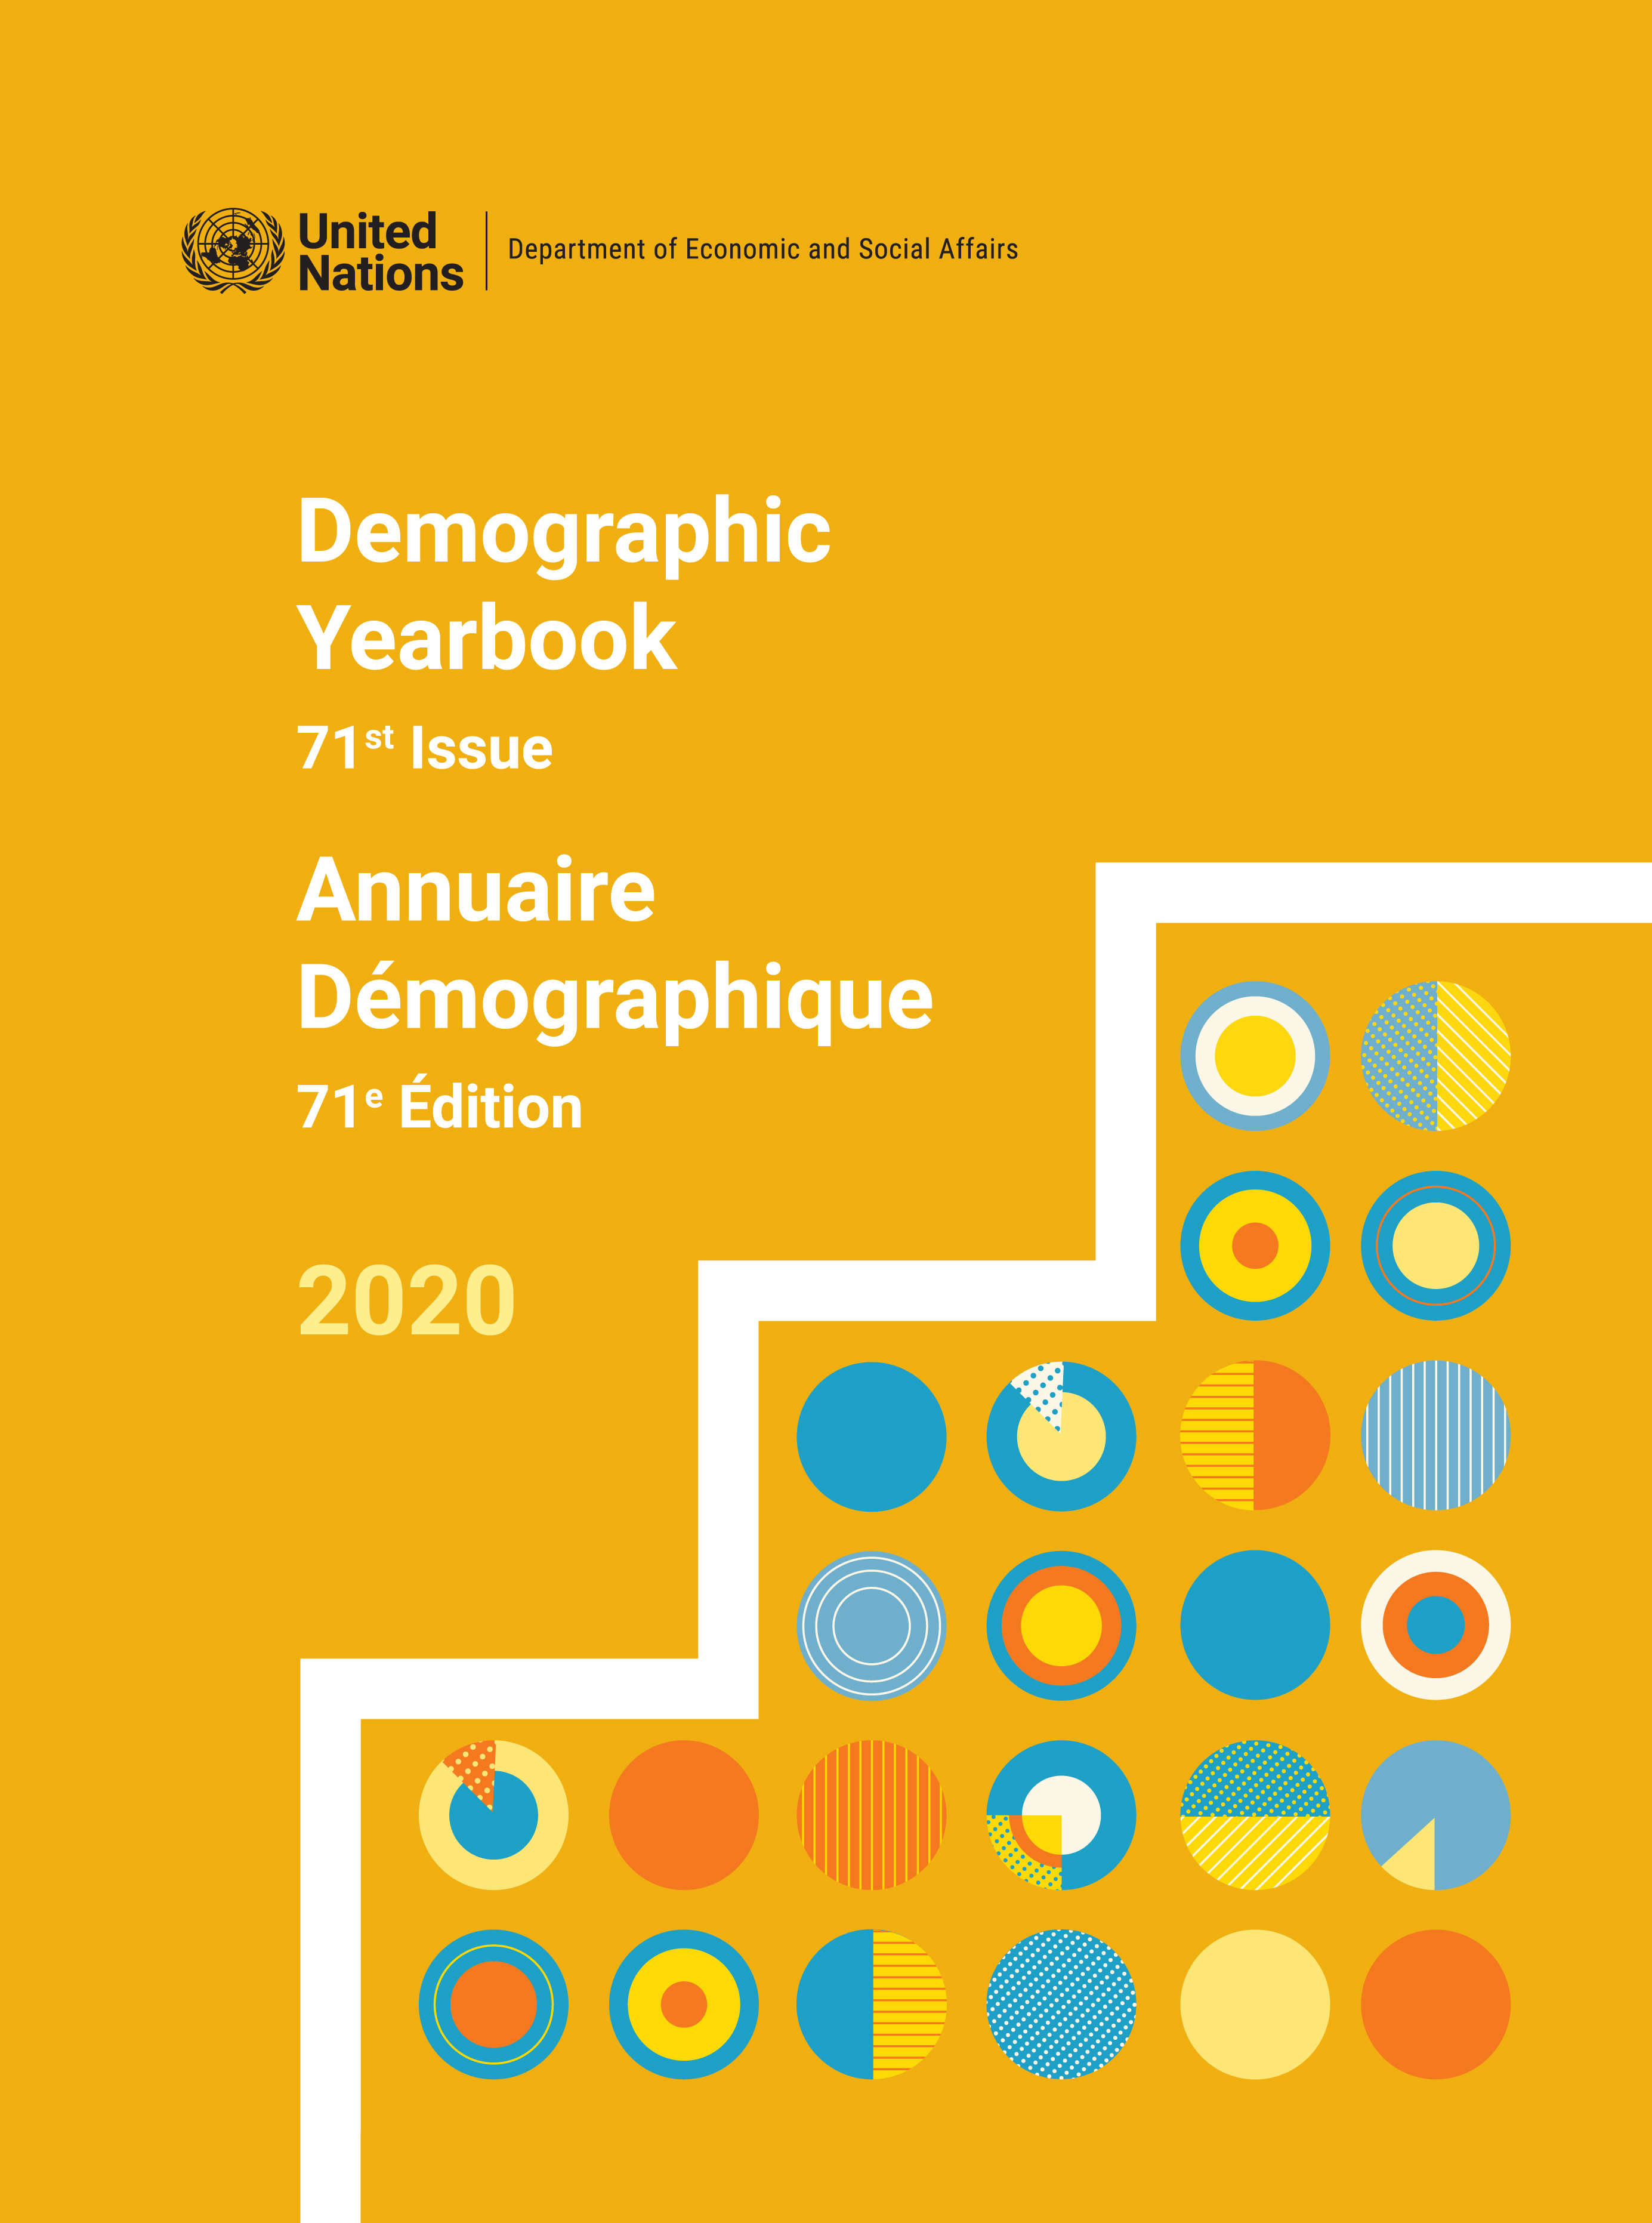 image of United Nations Demographic Yearbook 2020